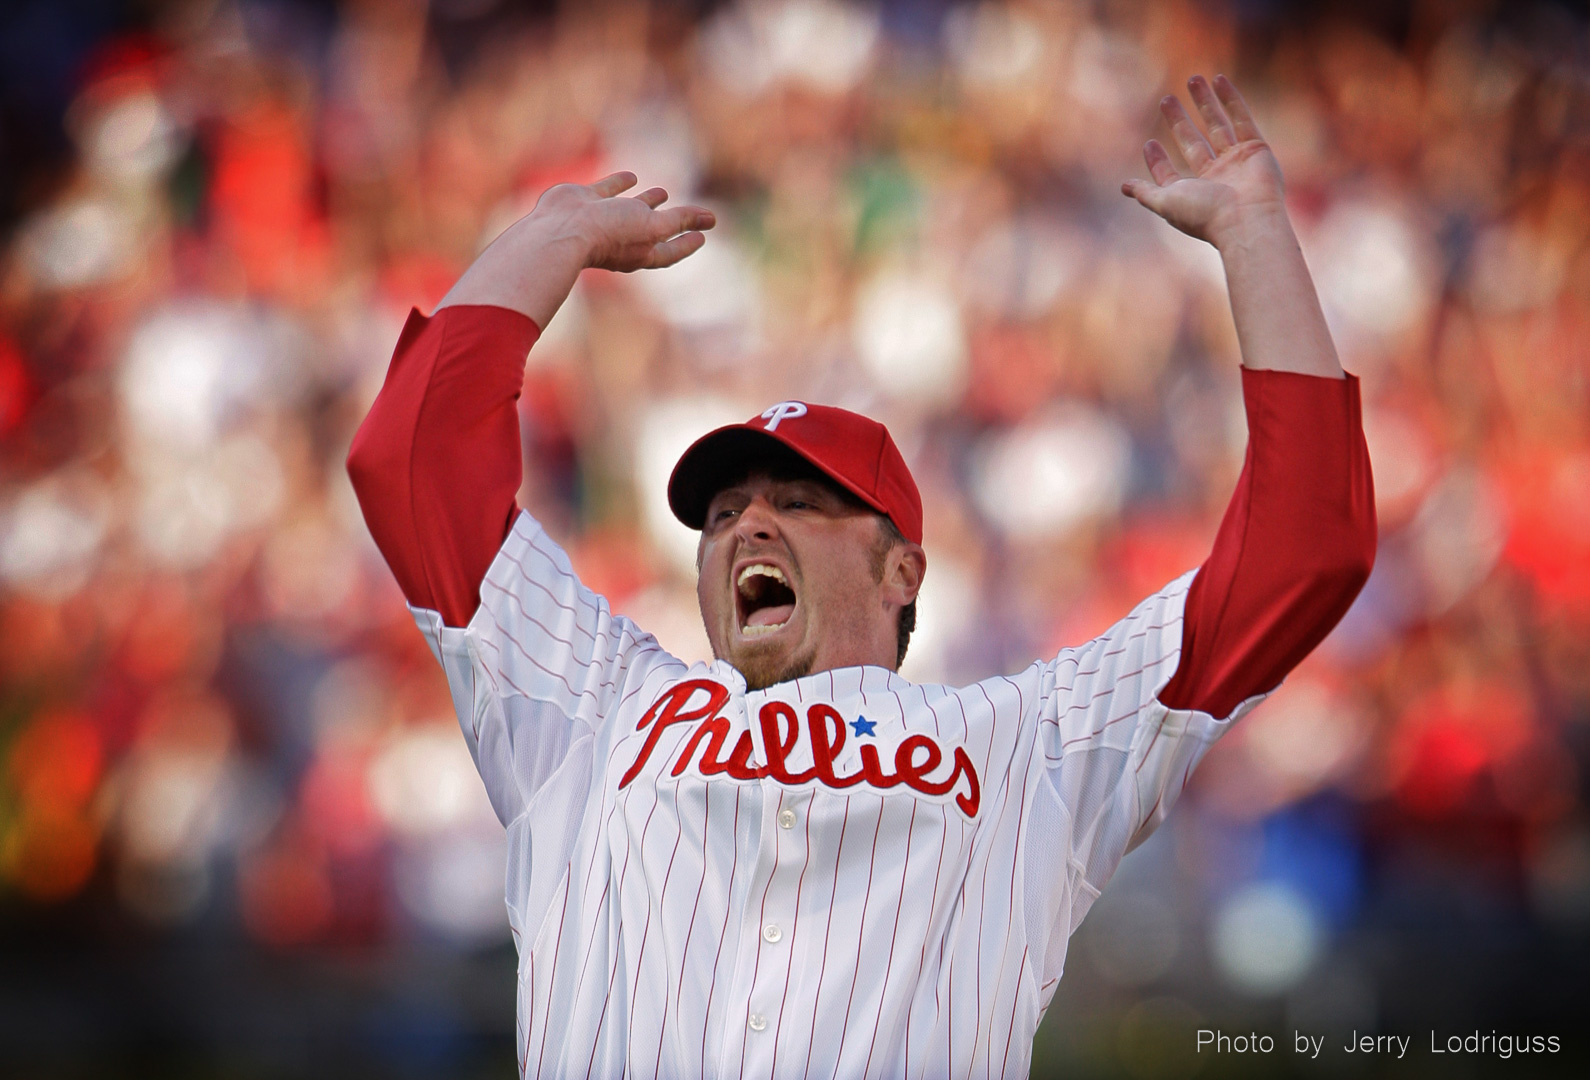 Phillies closer Brett Myers reacts in jubilation after the final out of the 6-1 Phillies victory over Washington that gave Philadelphia the National League East division crown at in Philadelphia on Saunday September 30, 2007.